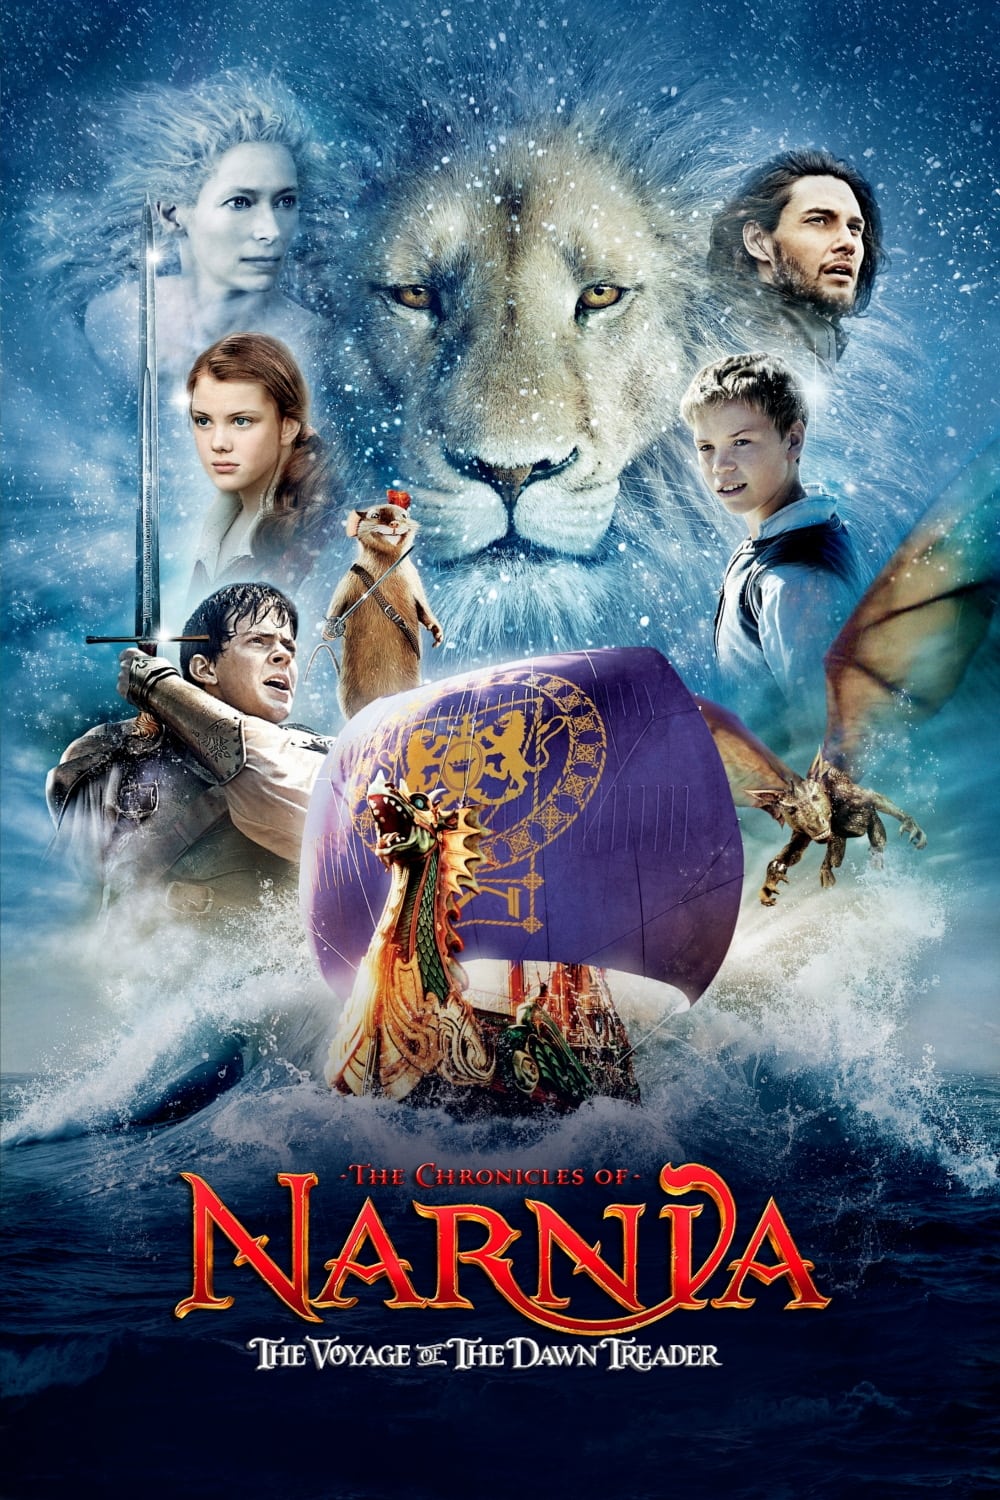 The Chronicles of Narnia: The Voyage of the Dawn Treader (2010) Download